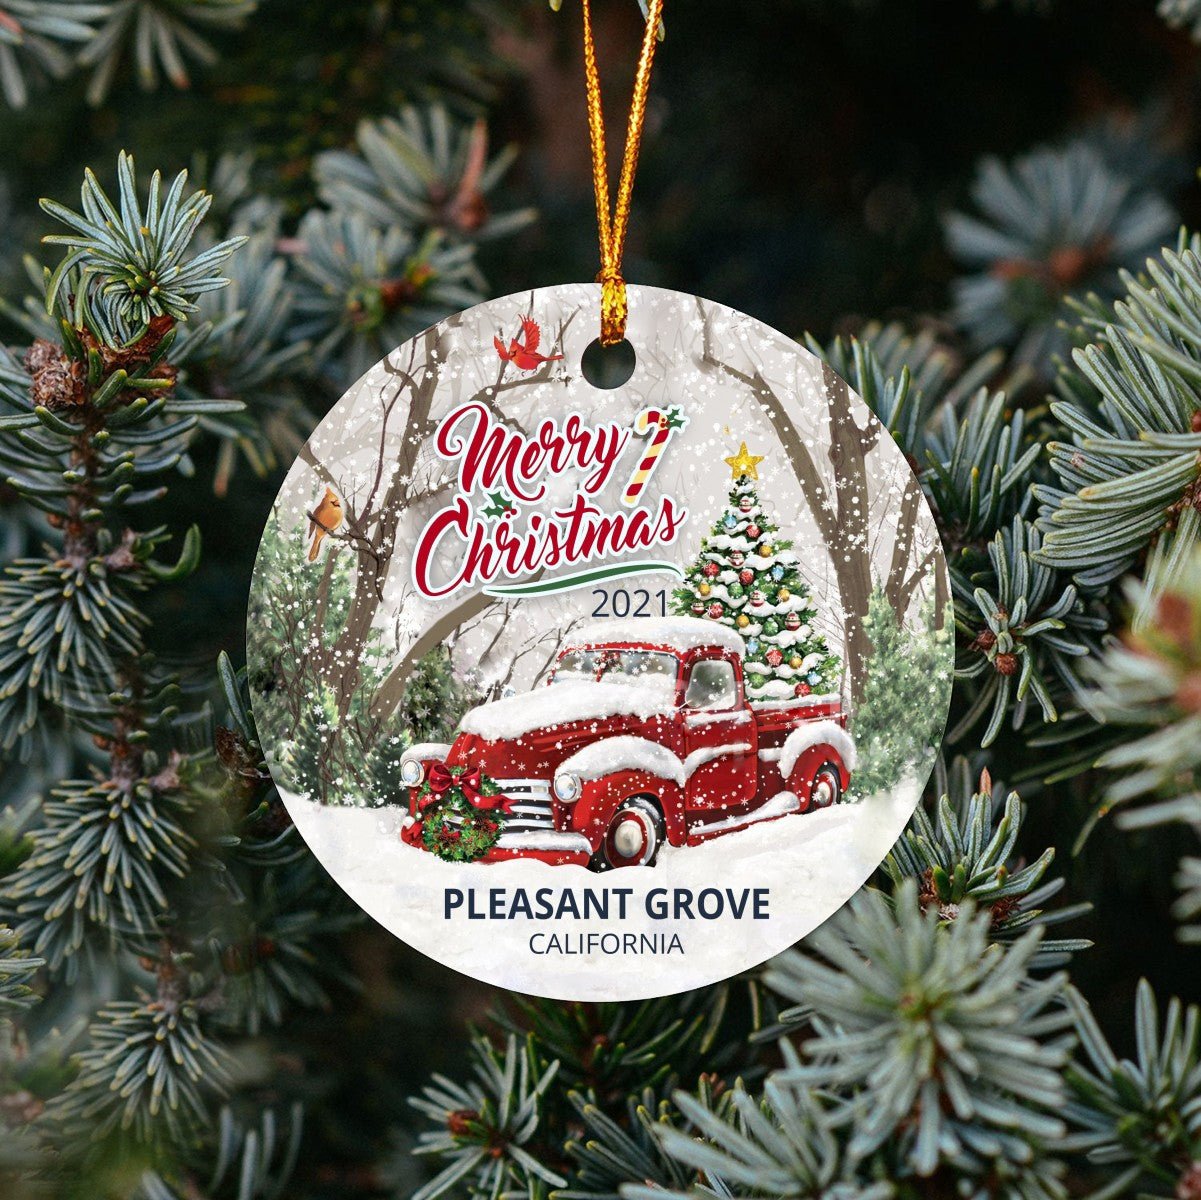 Christmas Tree Ornaments Pleasant Grove - Ornament With Name City, State Pleasant Grove California CA Ornament - Red Truck Xmas Ornaments 3'' Plastic Gift For Family, Friend And Housewarming